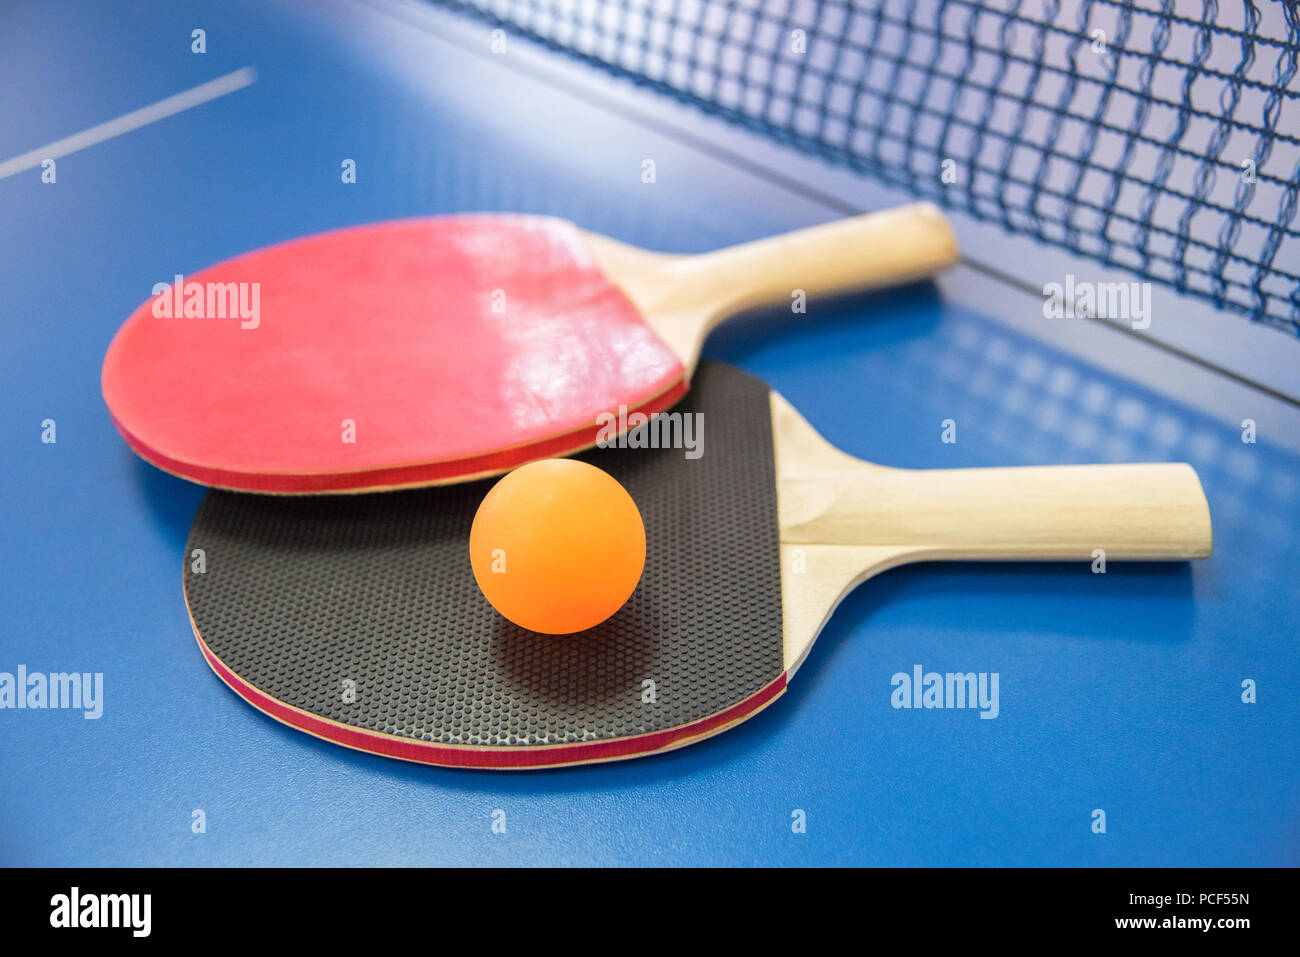 Orange ball for table tennis and two wooden rackets of red and black color on a blue table with a grid Stock Photo